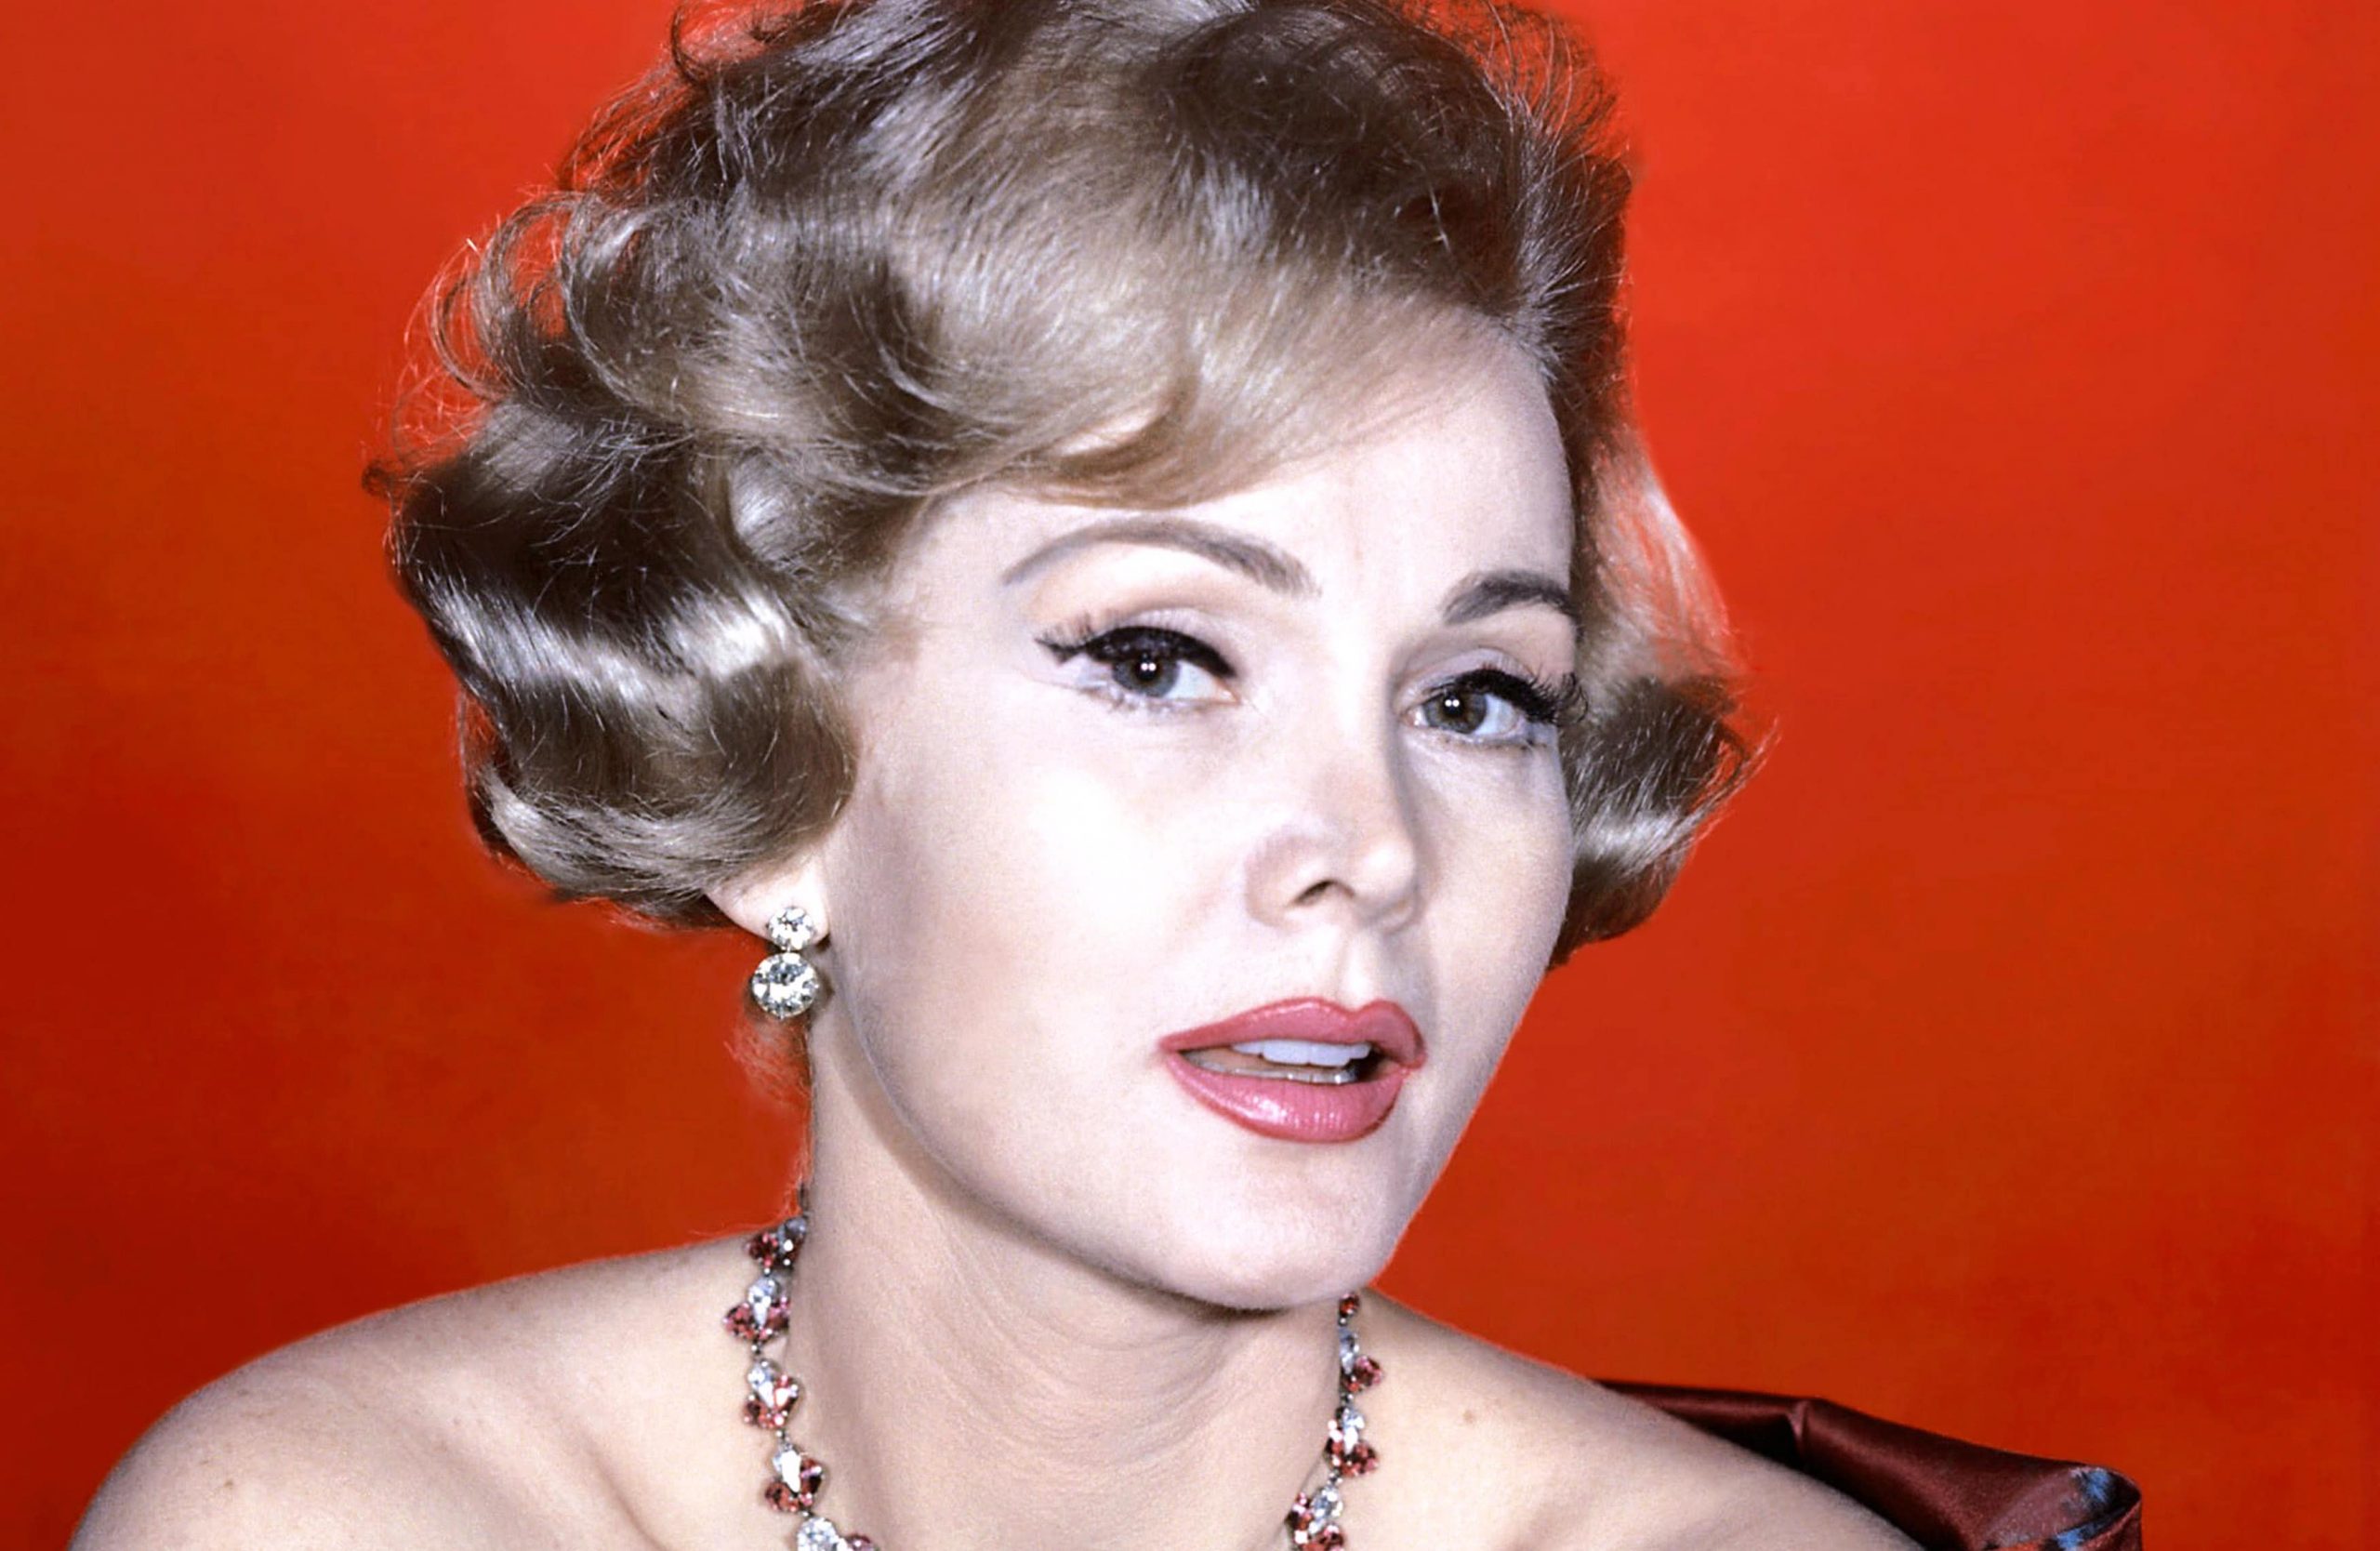 Zsa Zsa Gabor, R.I.P. - Cause of Death, Date of Death, Age and Birthday - Stars We Lost